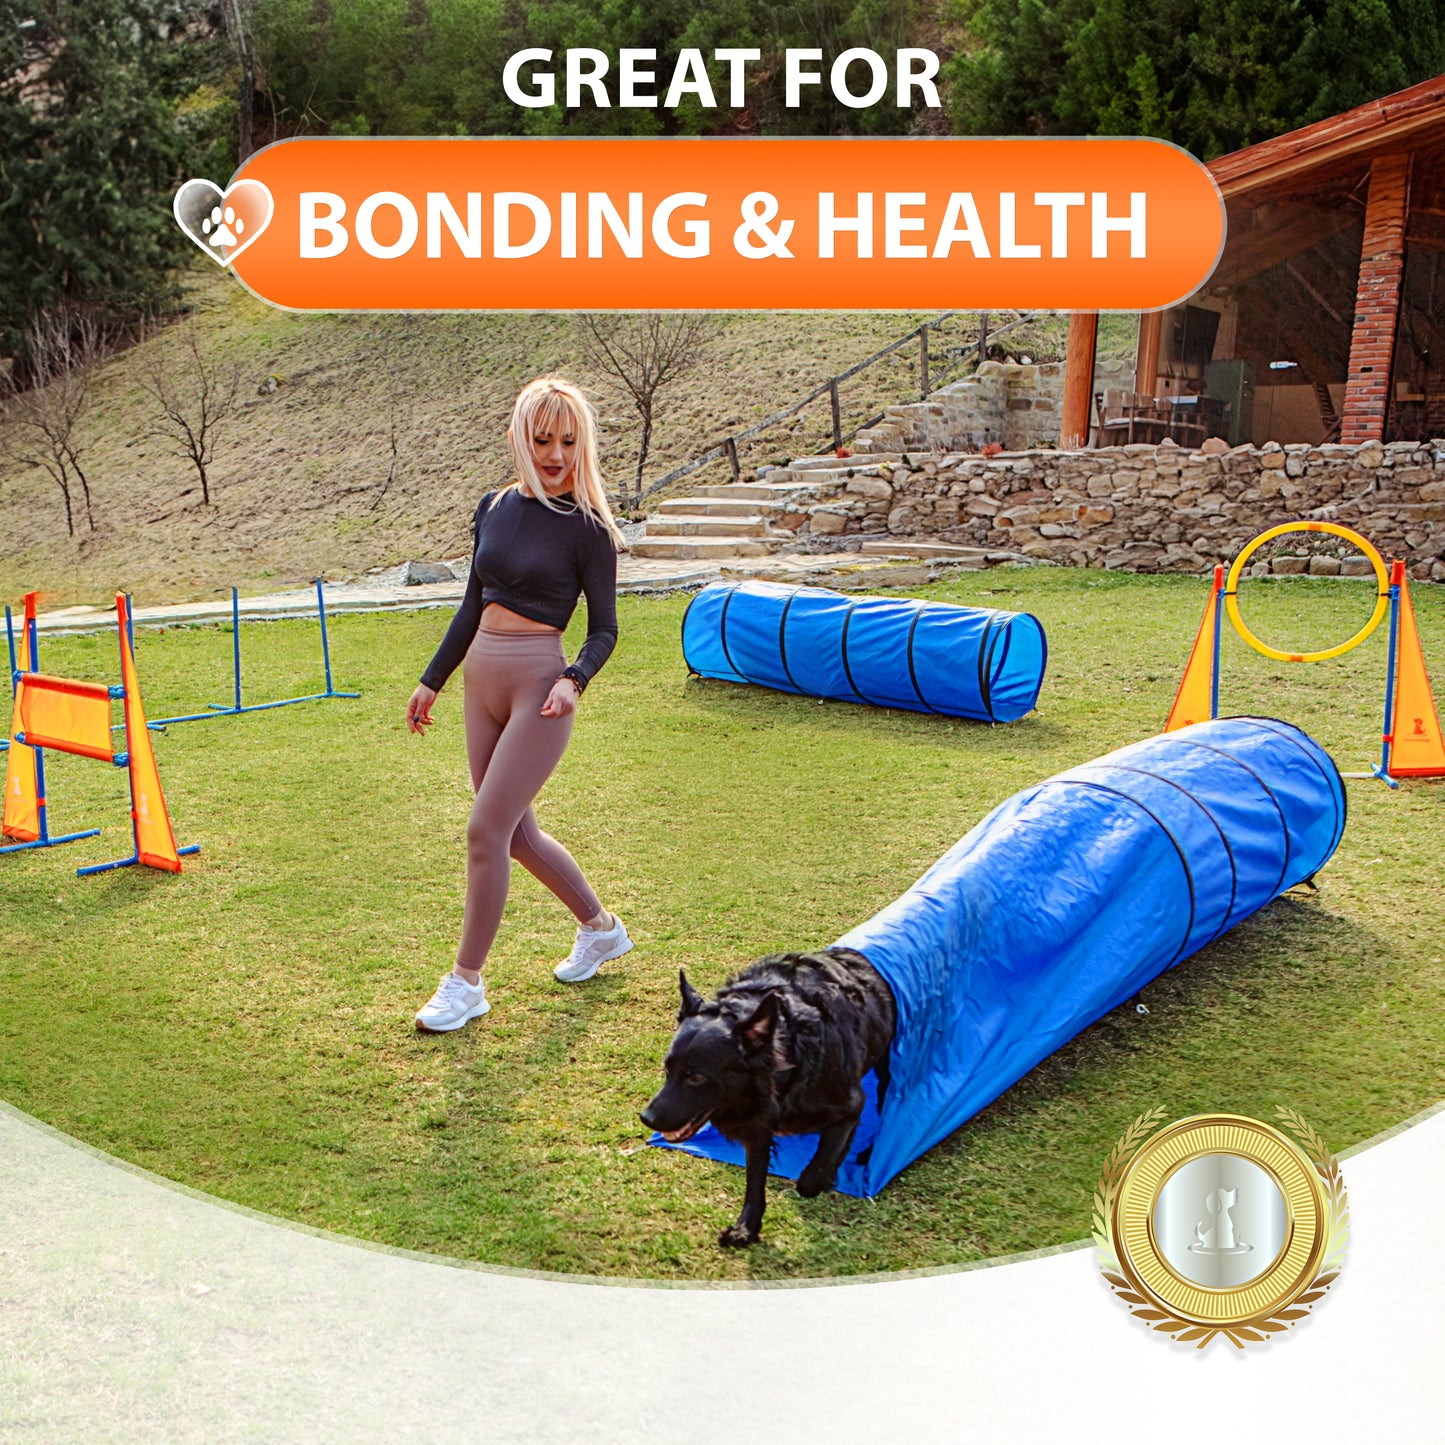 The SparklyPets Extended Dog Agility Equipment Set